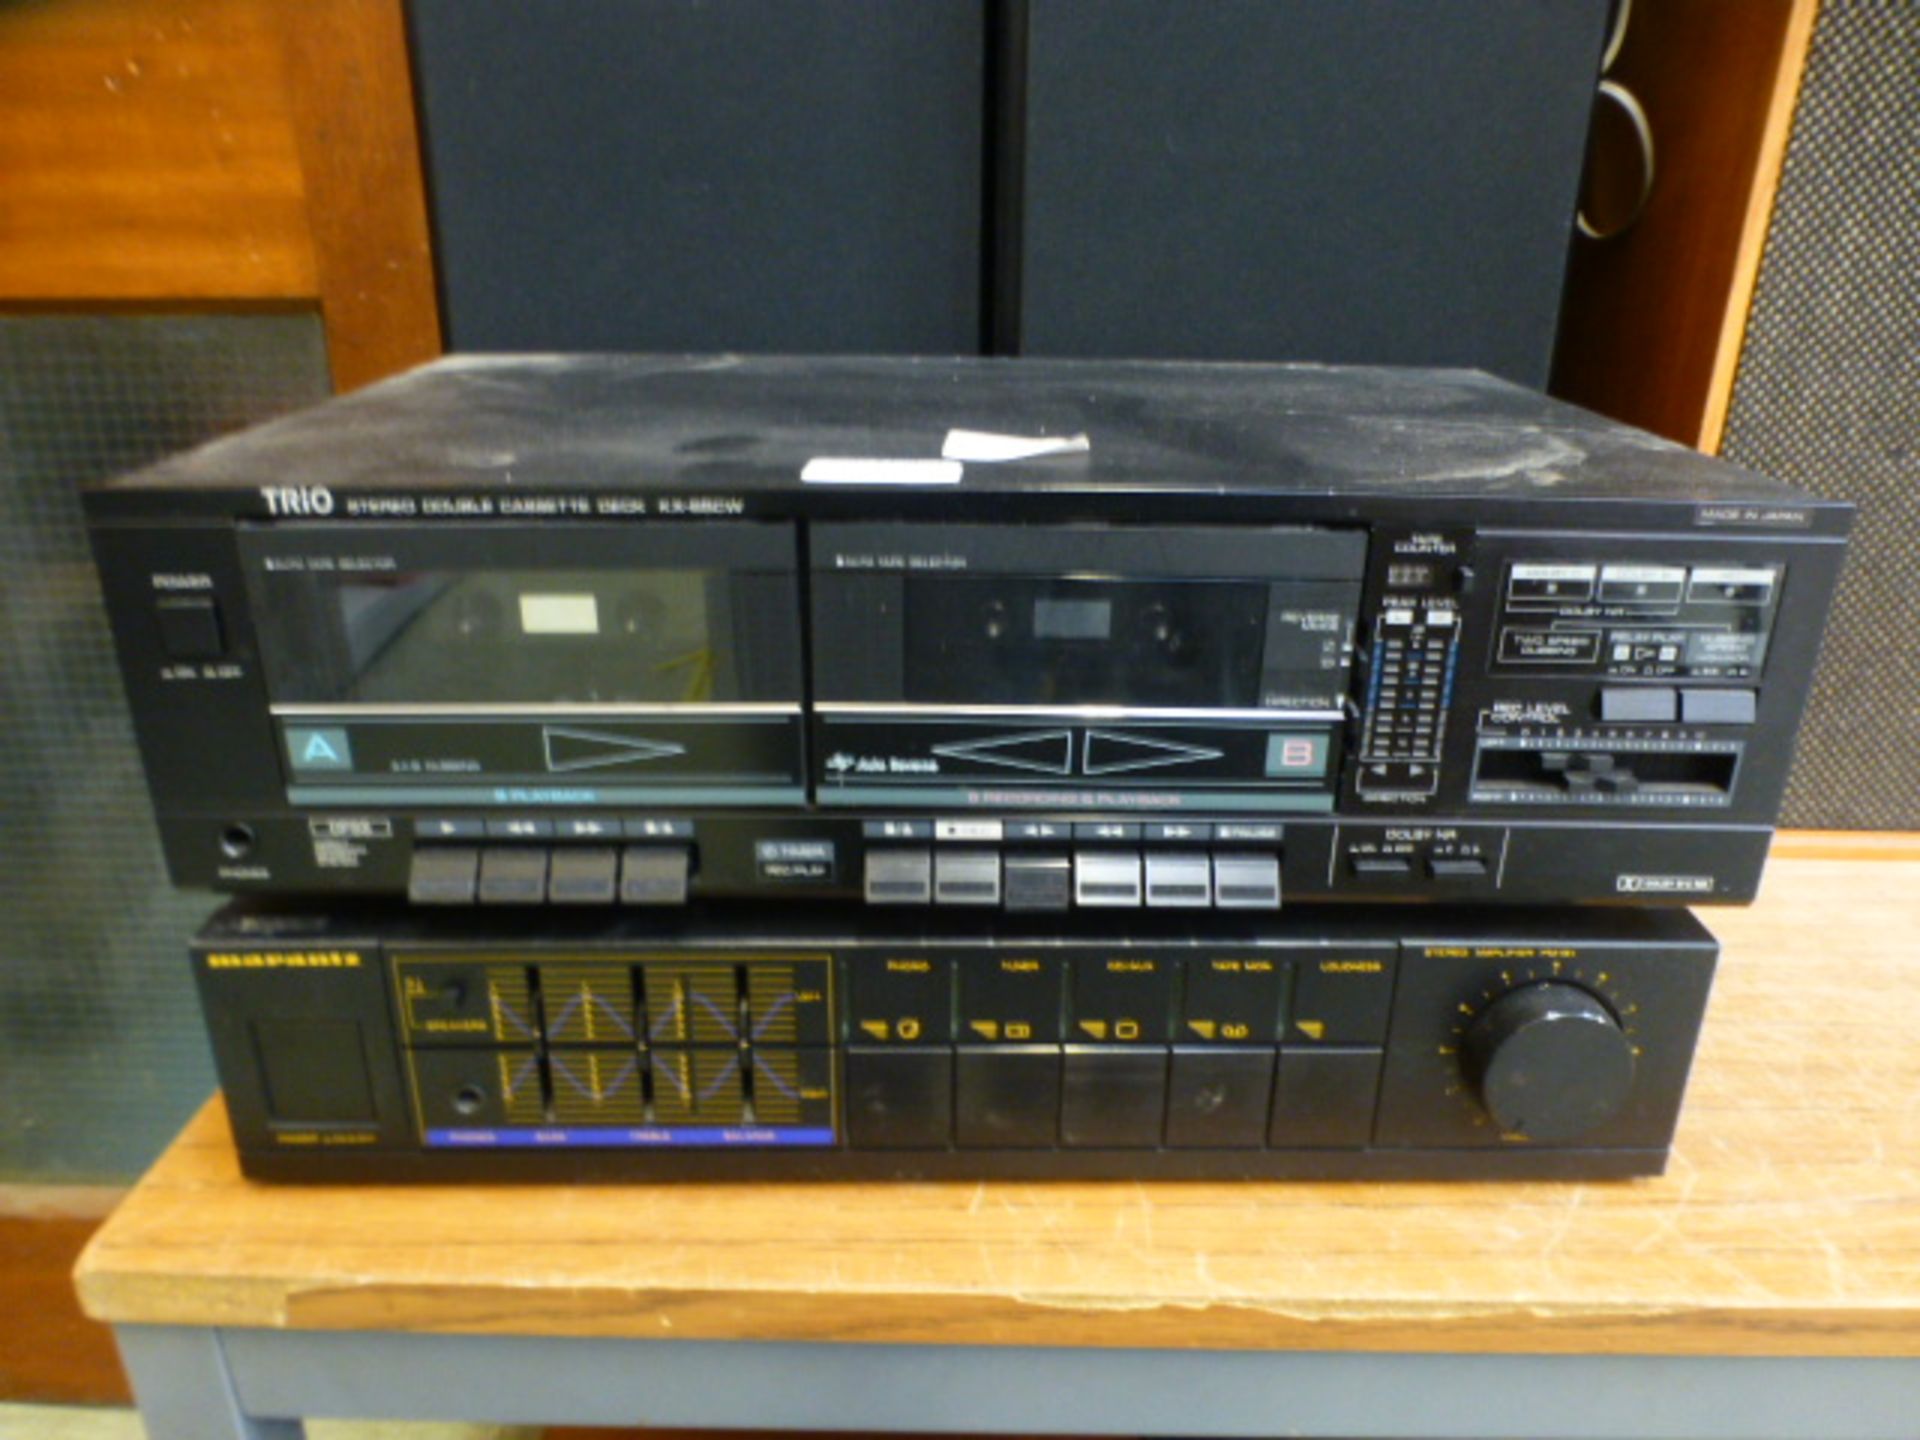 An Maraniz Equaliser together with a Trio stereo double cassette deck